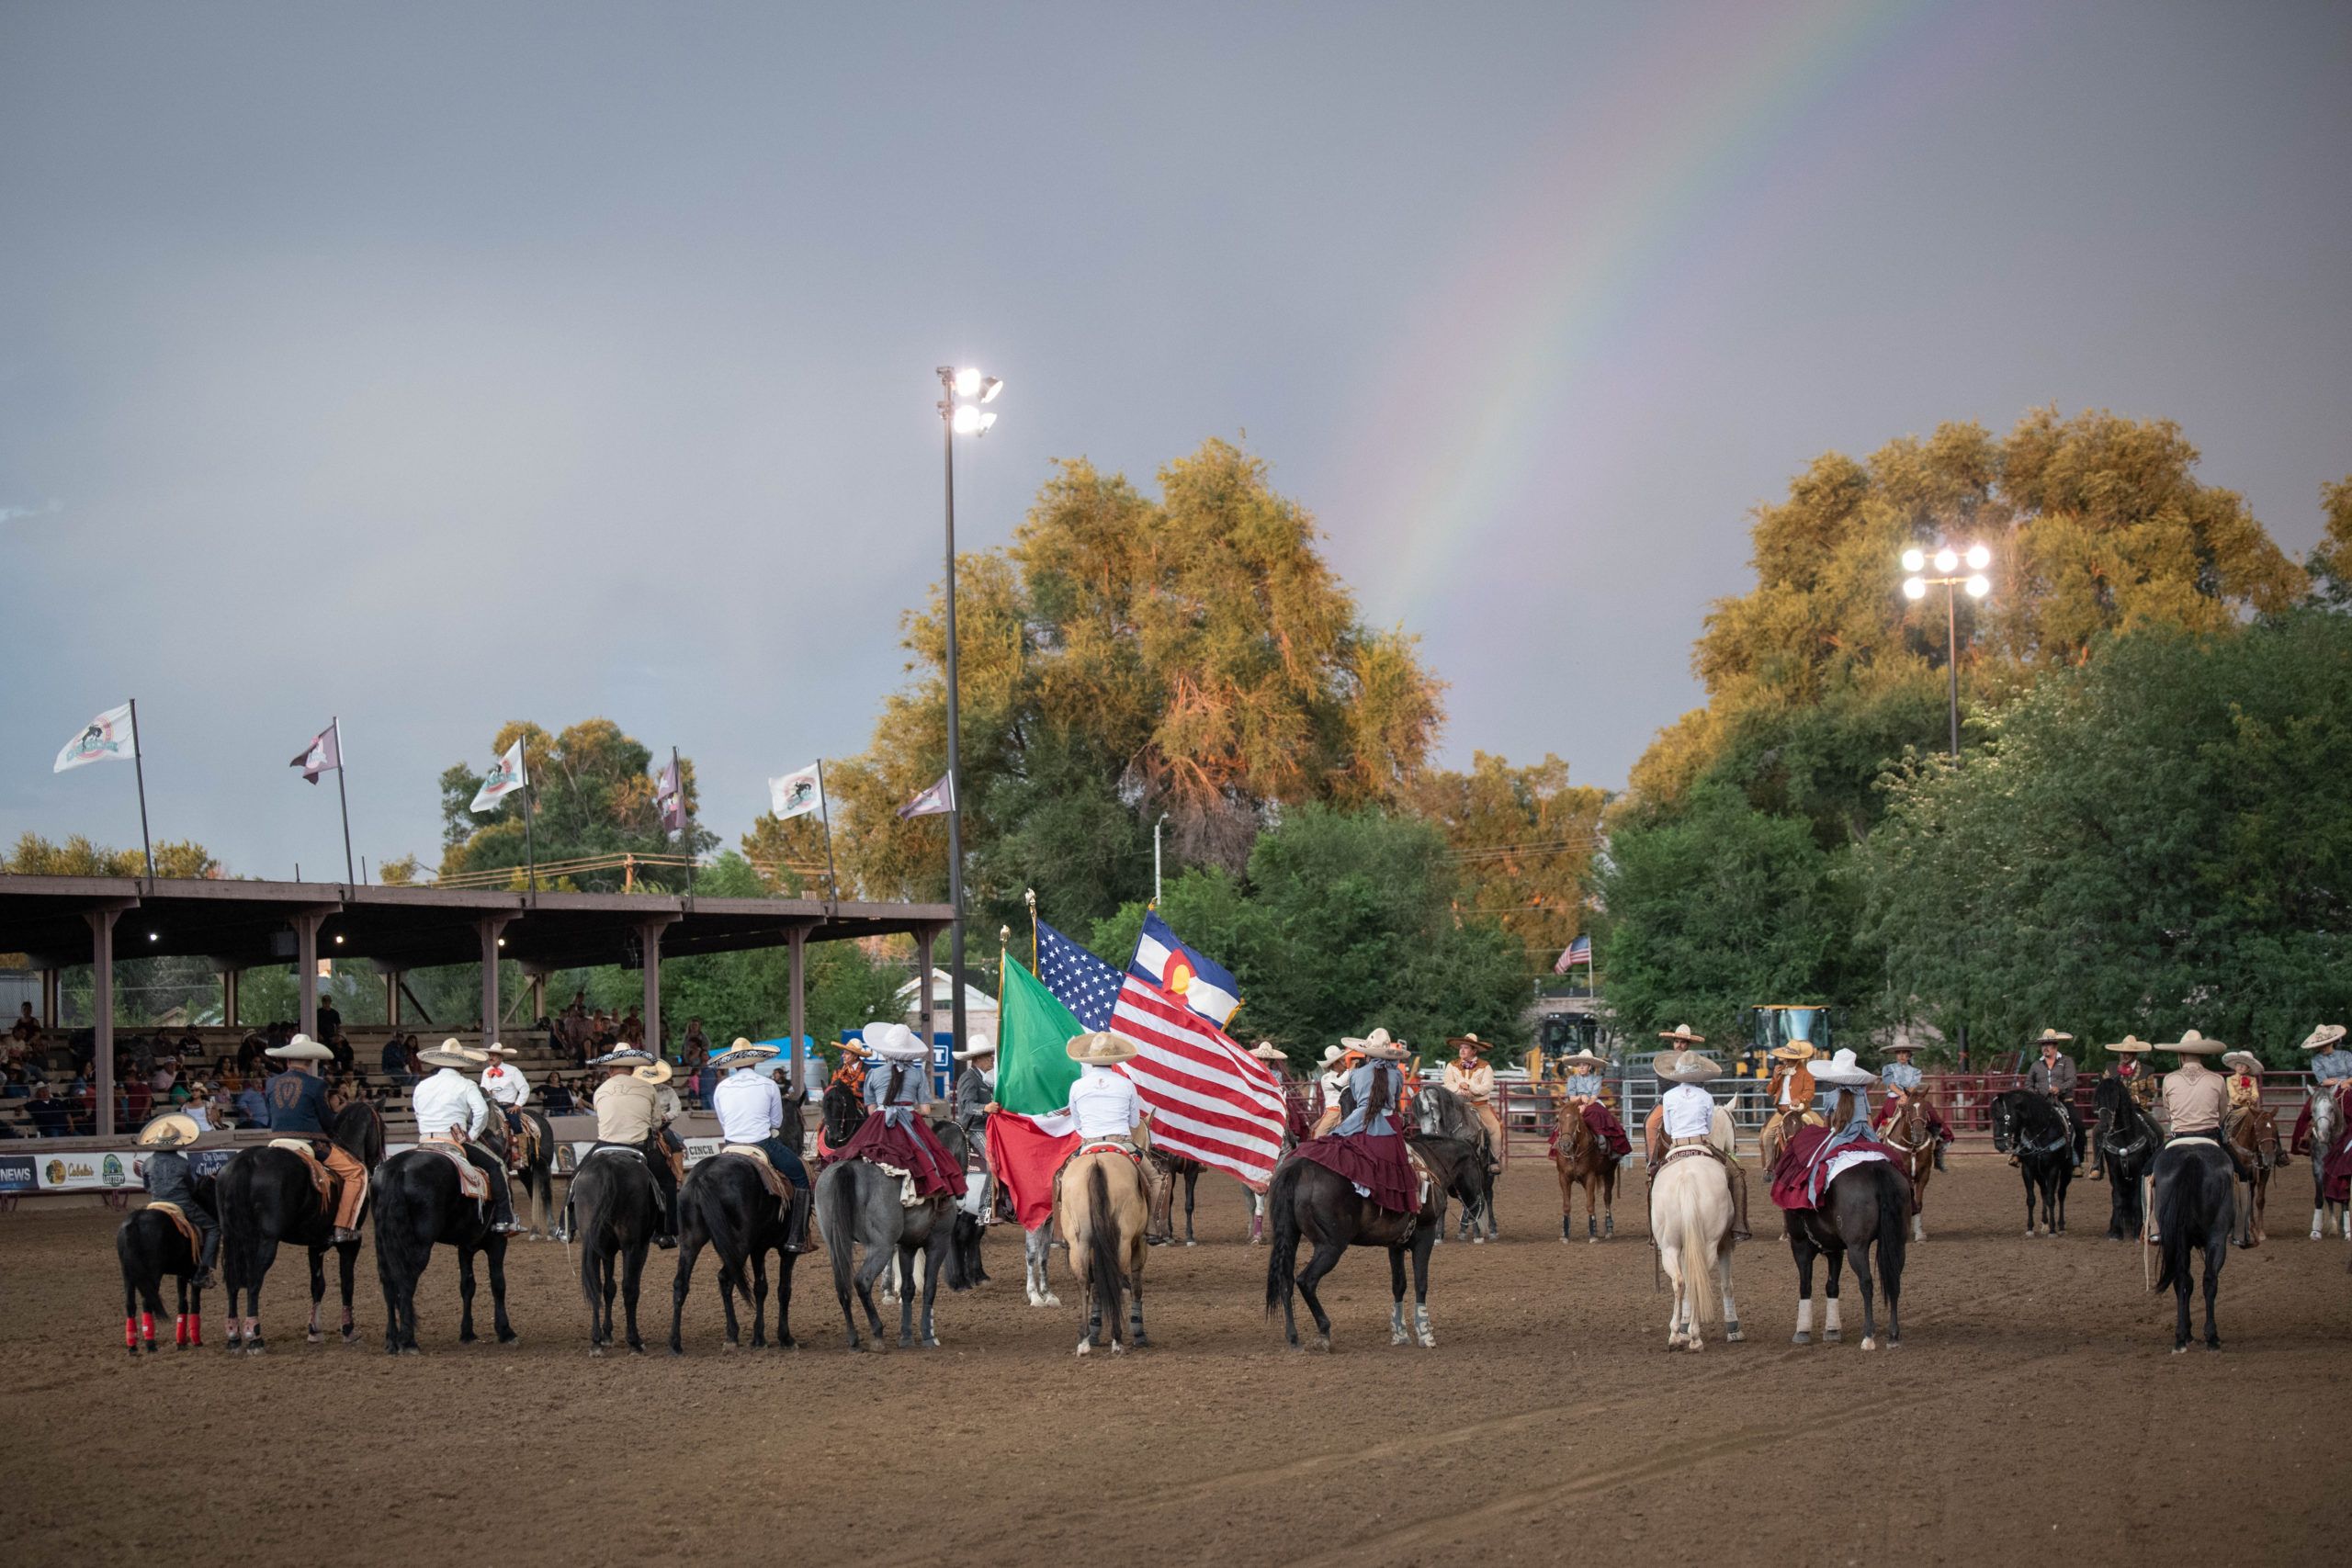 People riding horses in a line and holding flags